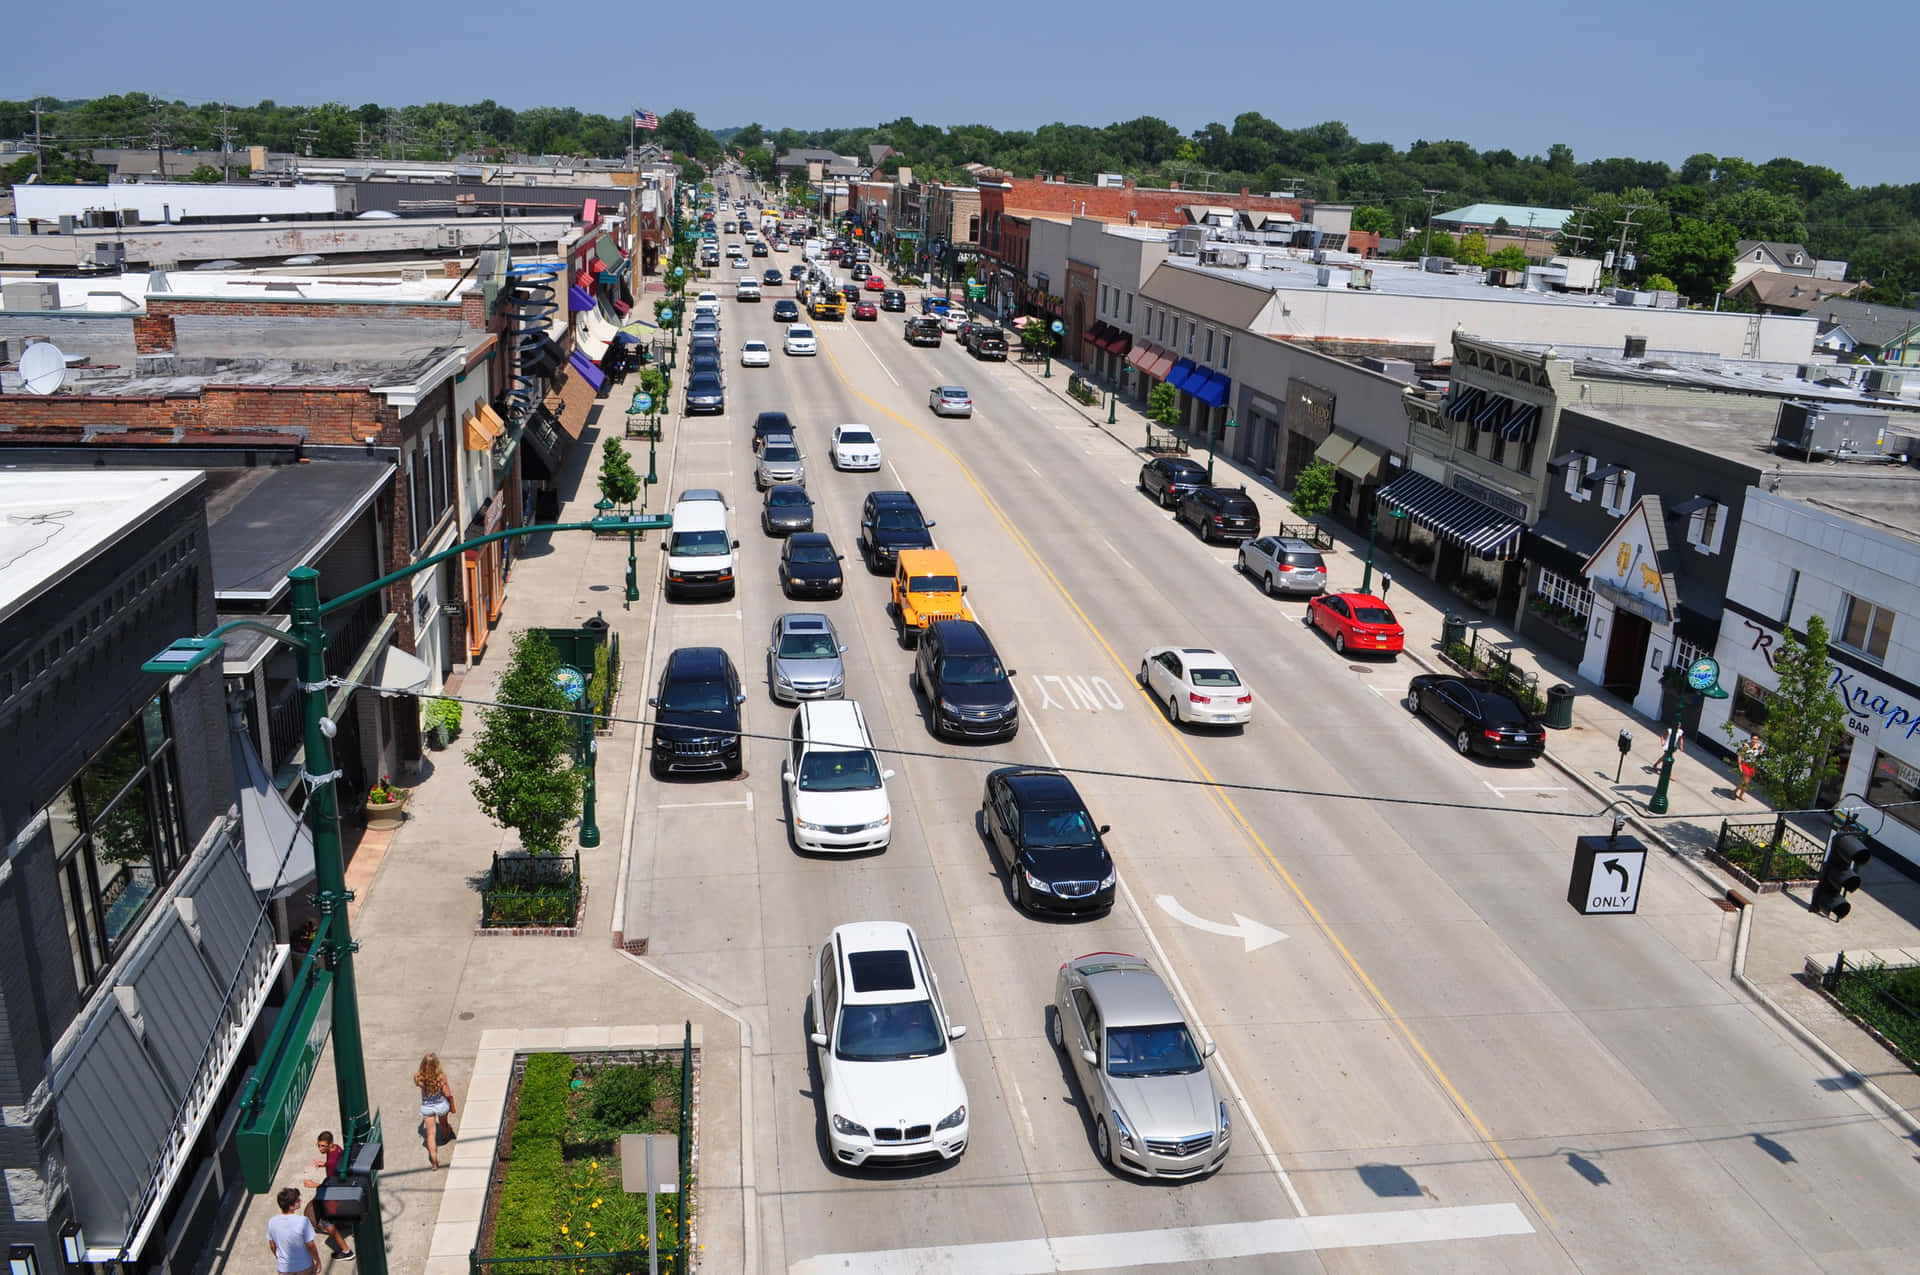 Downtown Rochester Traffic Aerial View Wallpaper